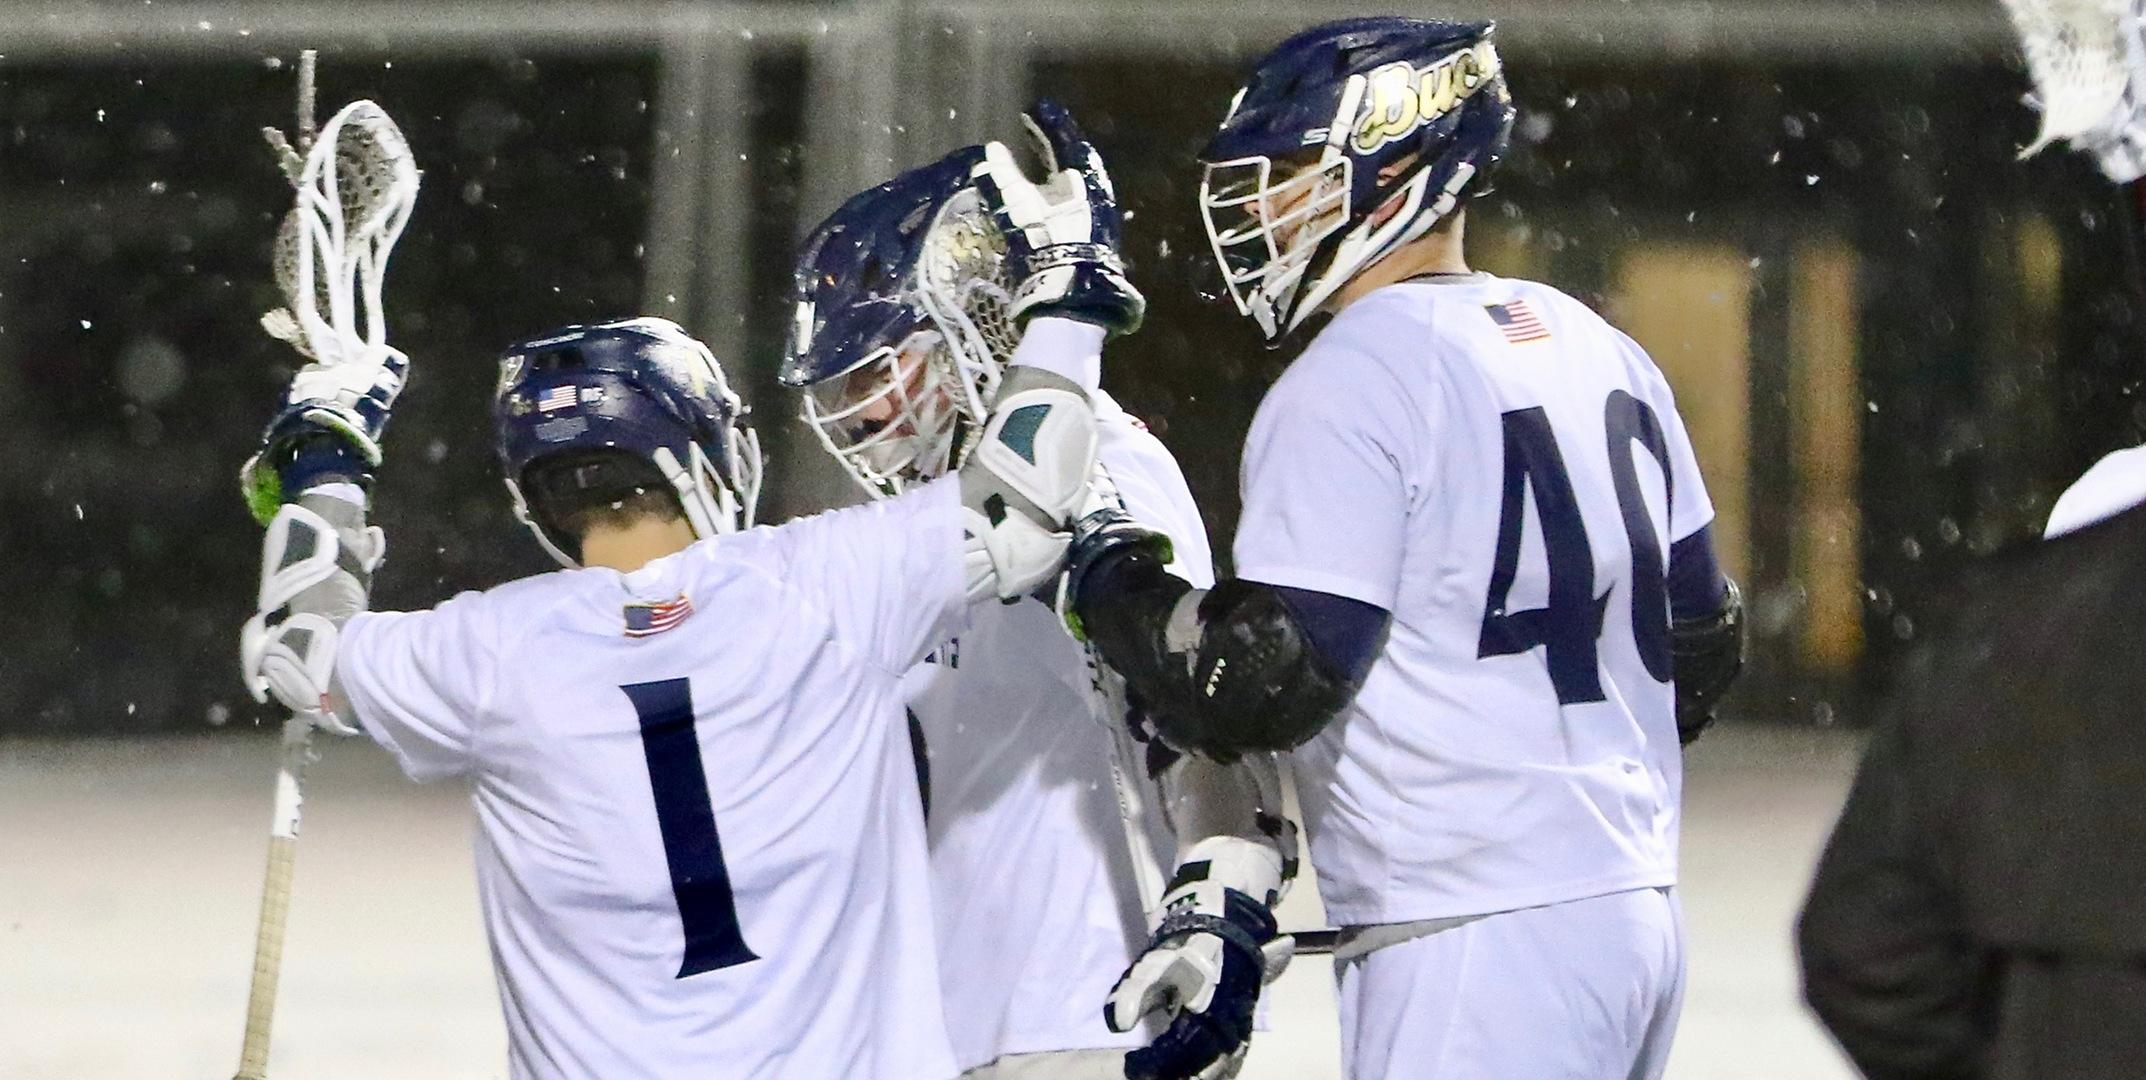 Men's Lacrosse Doubles up Mariners to win Admiral's Cup